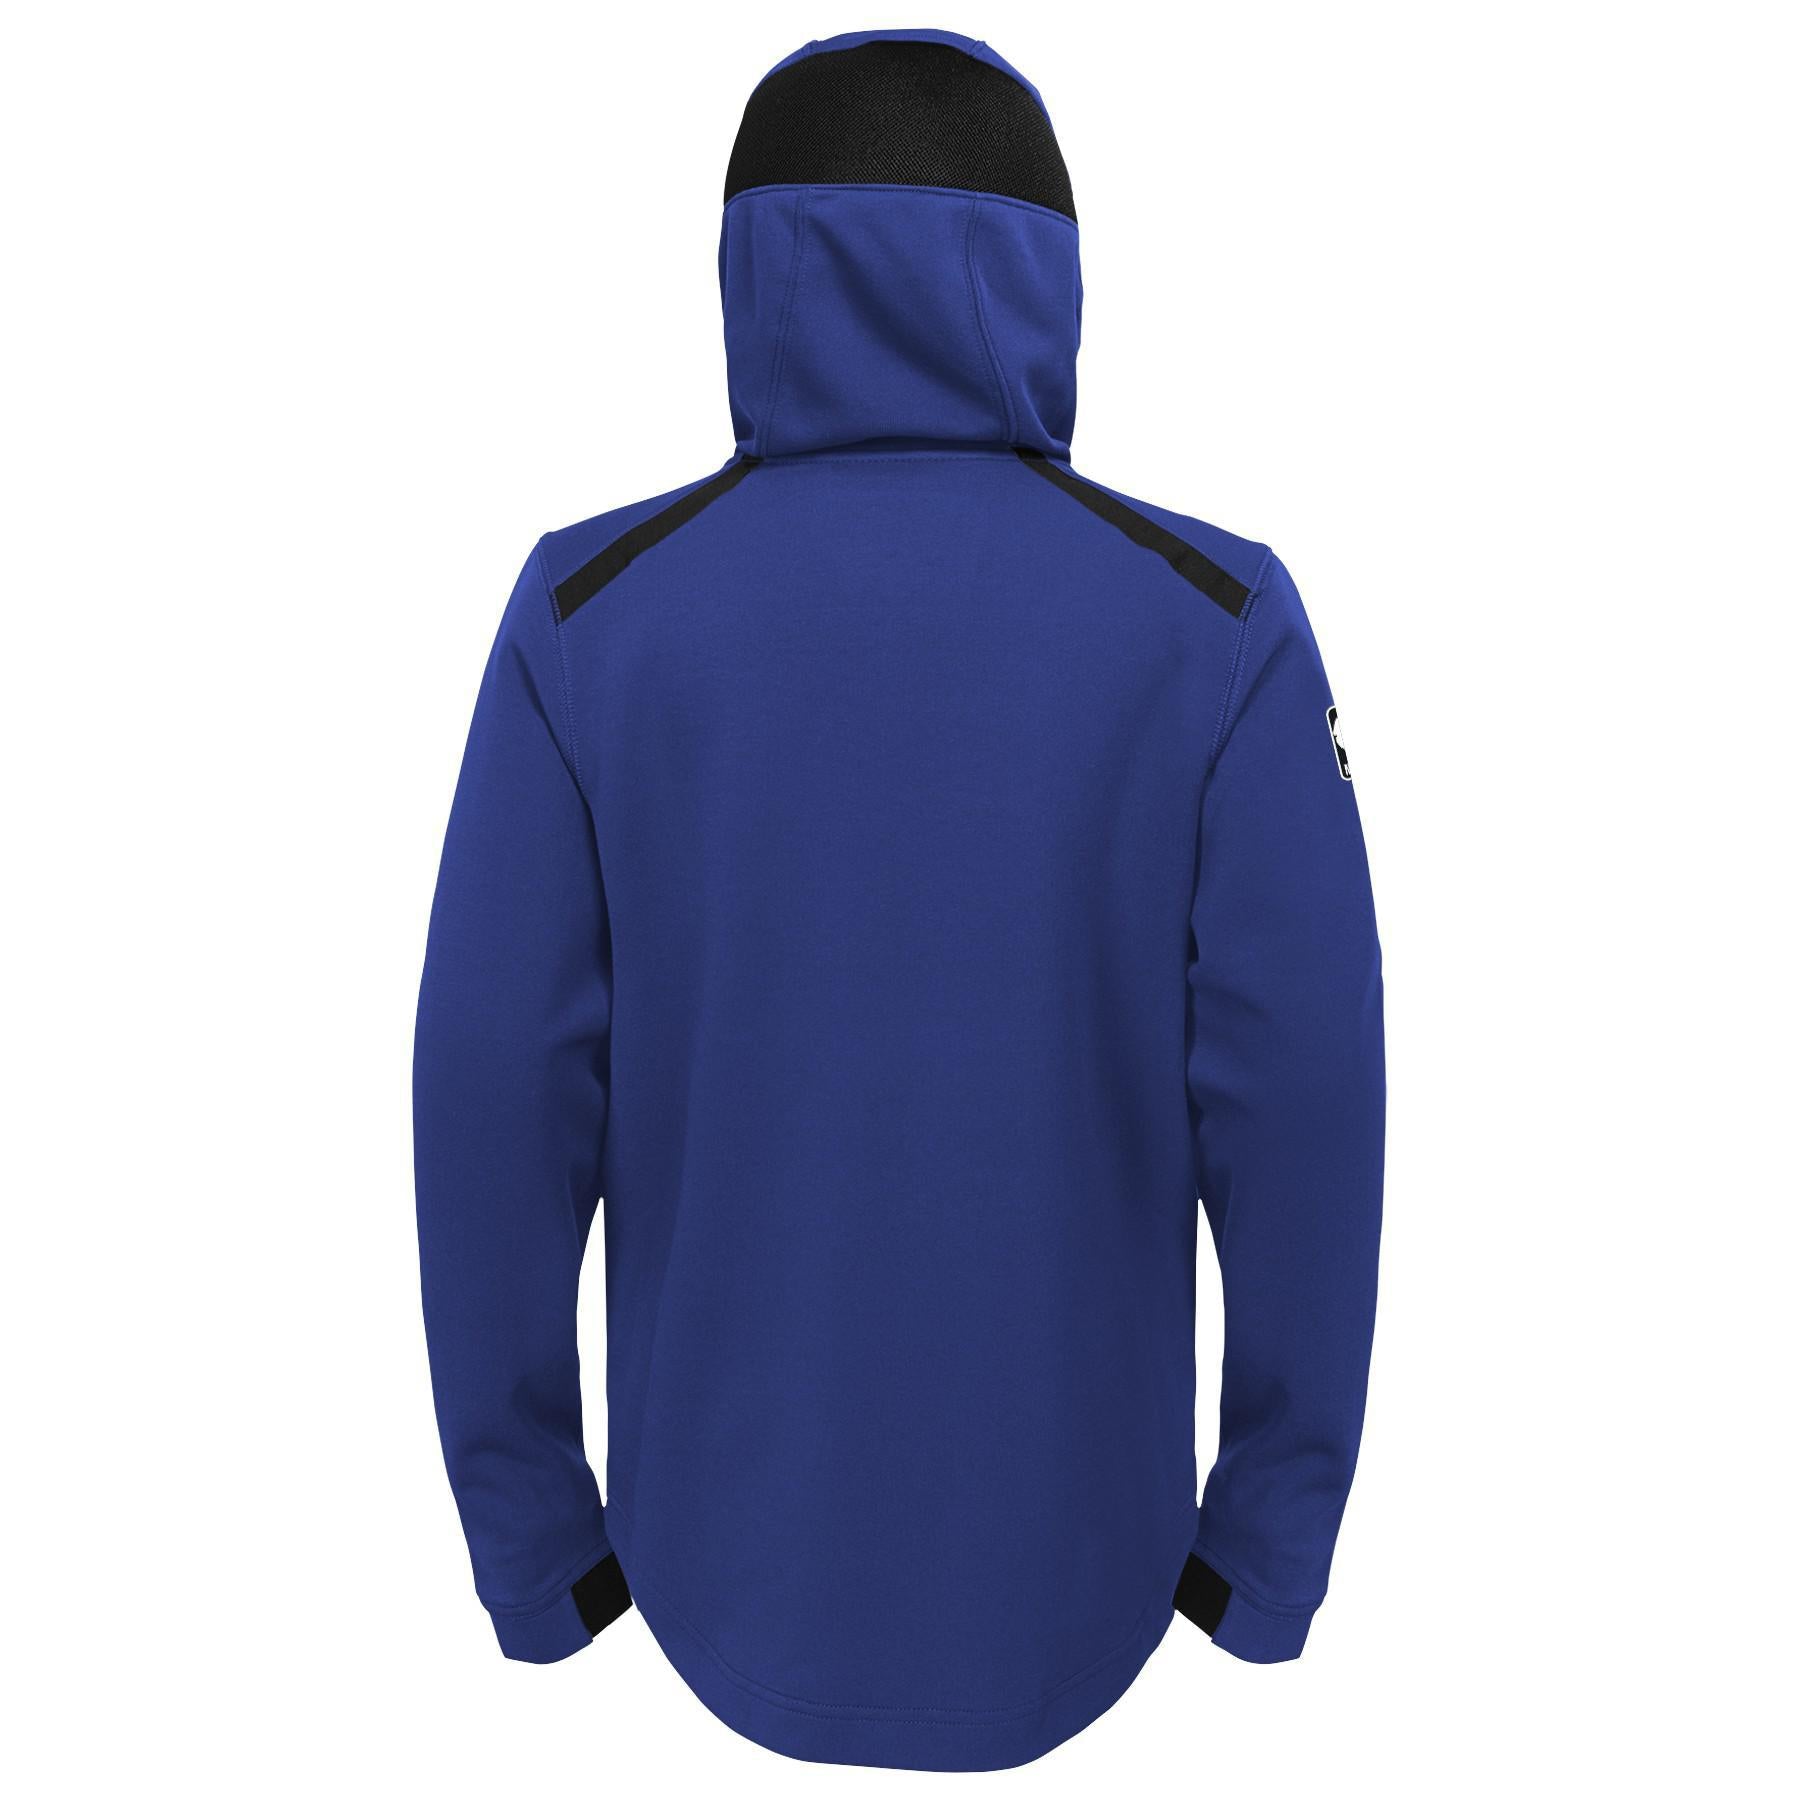 nike youth golden state warriors hoodie